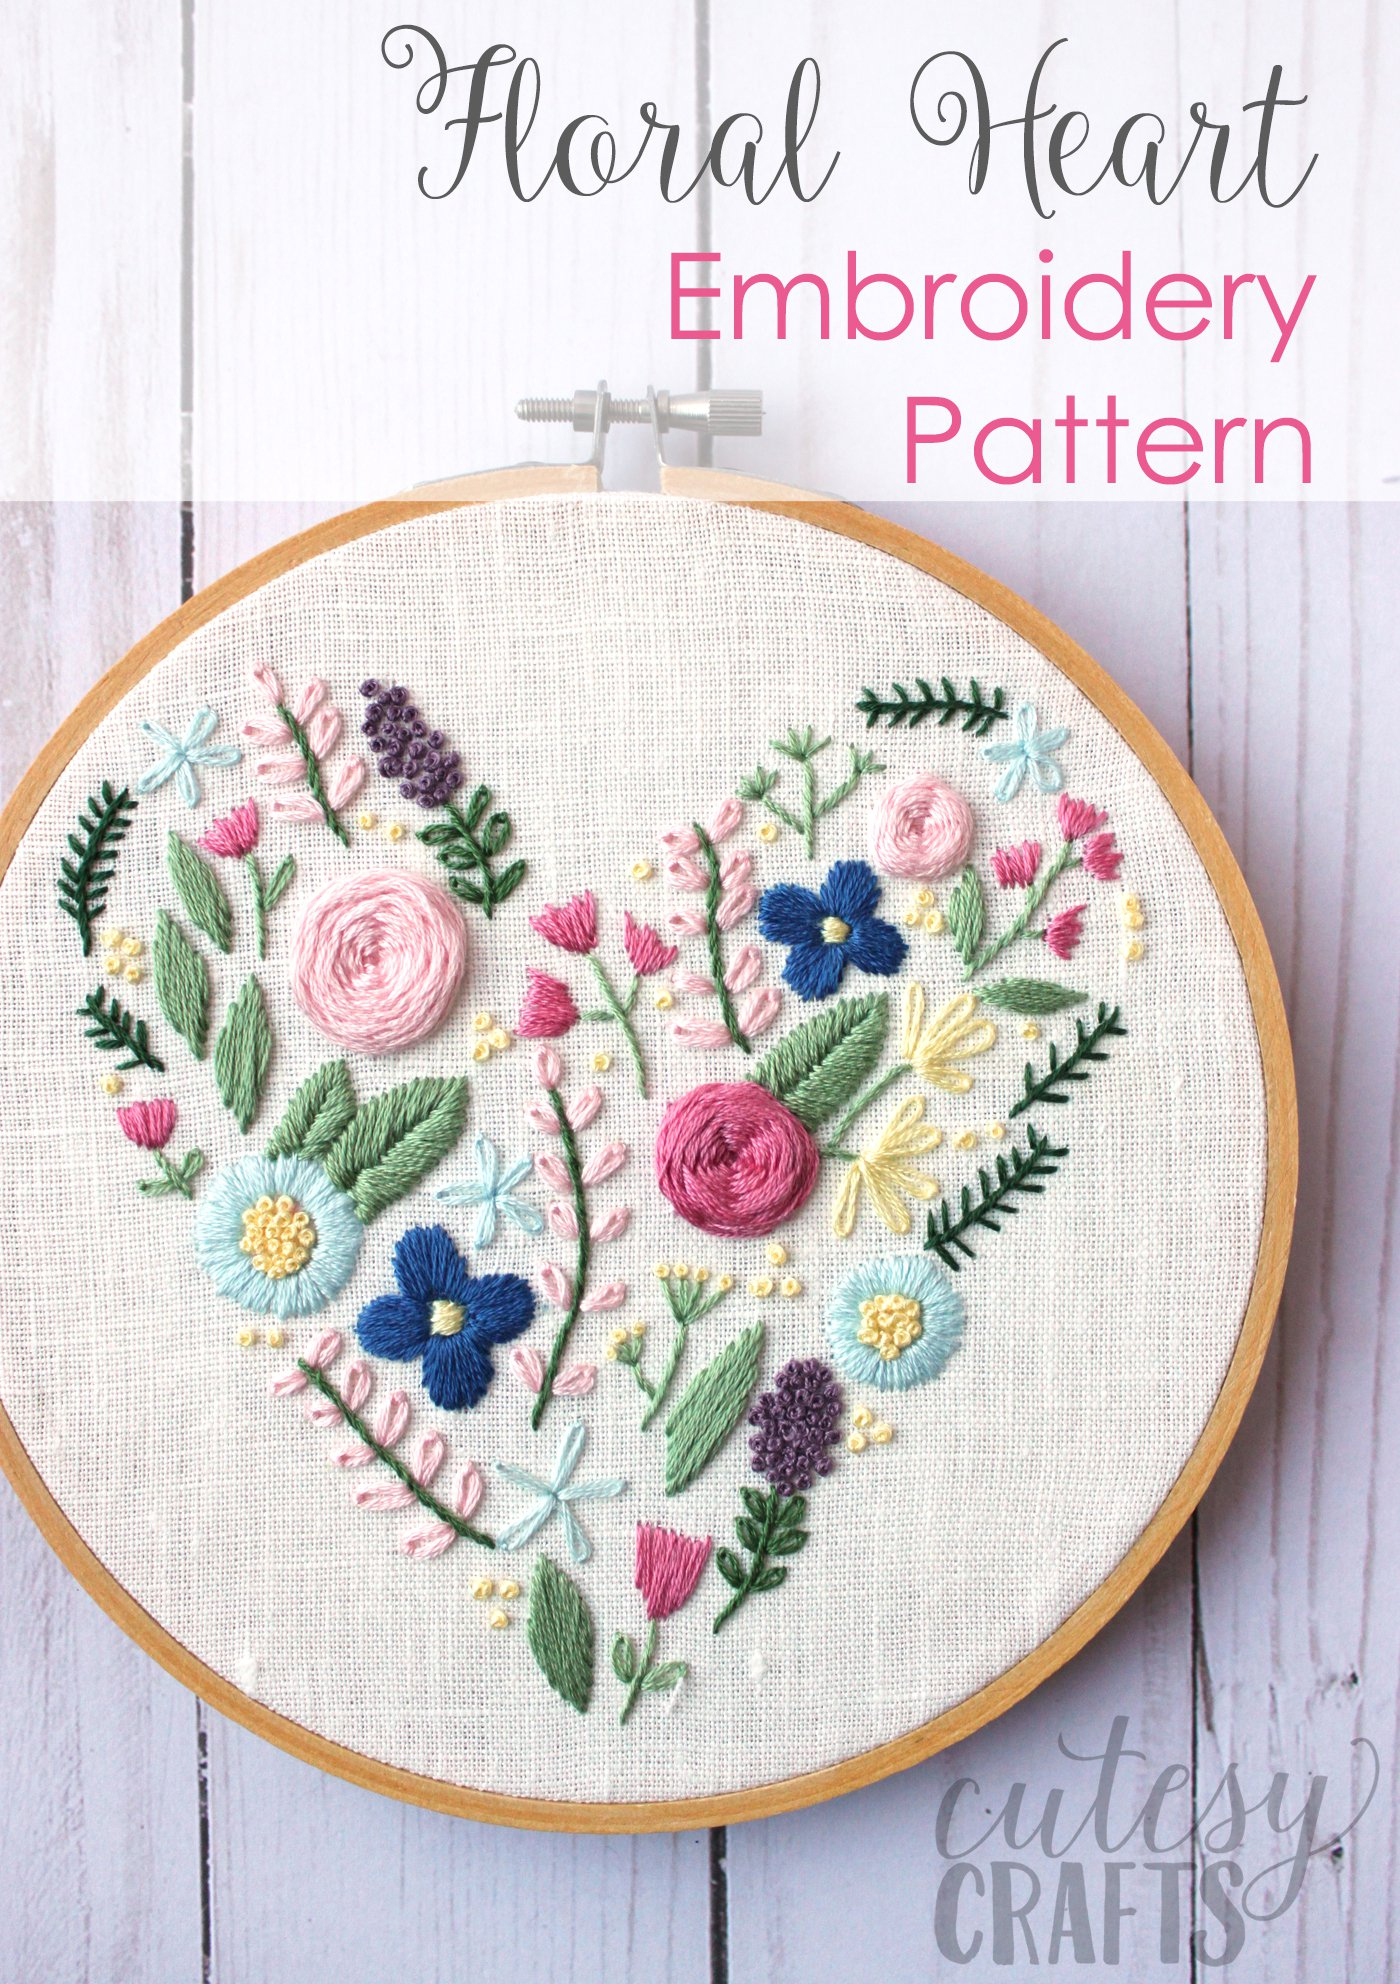 Rose Patterns For Embroidery Floral Heart Hand Embroidery Pattern The Polka Dot Chair